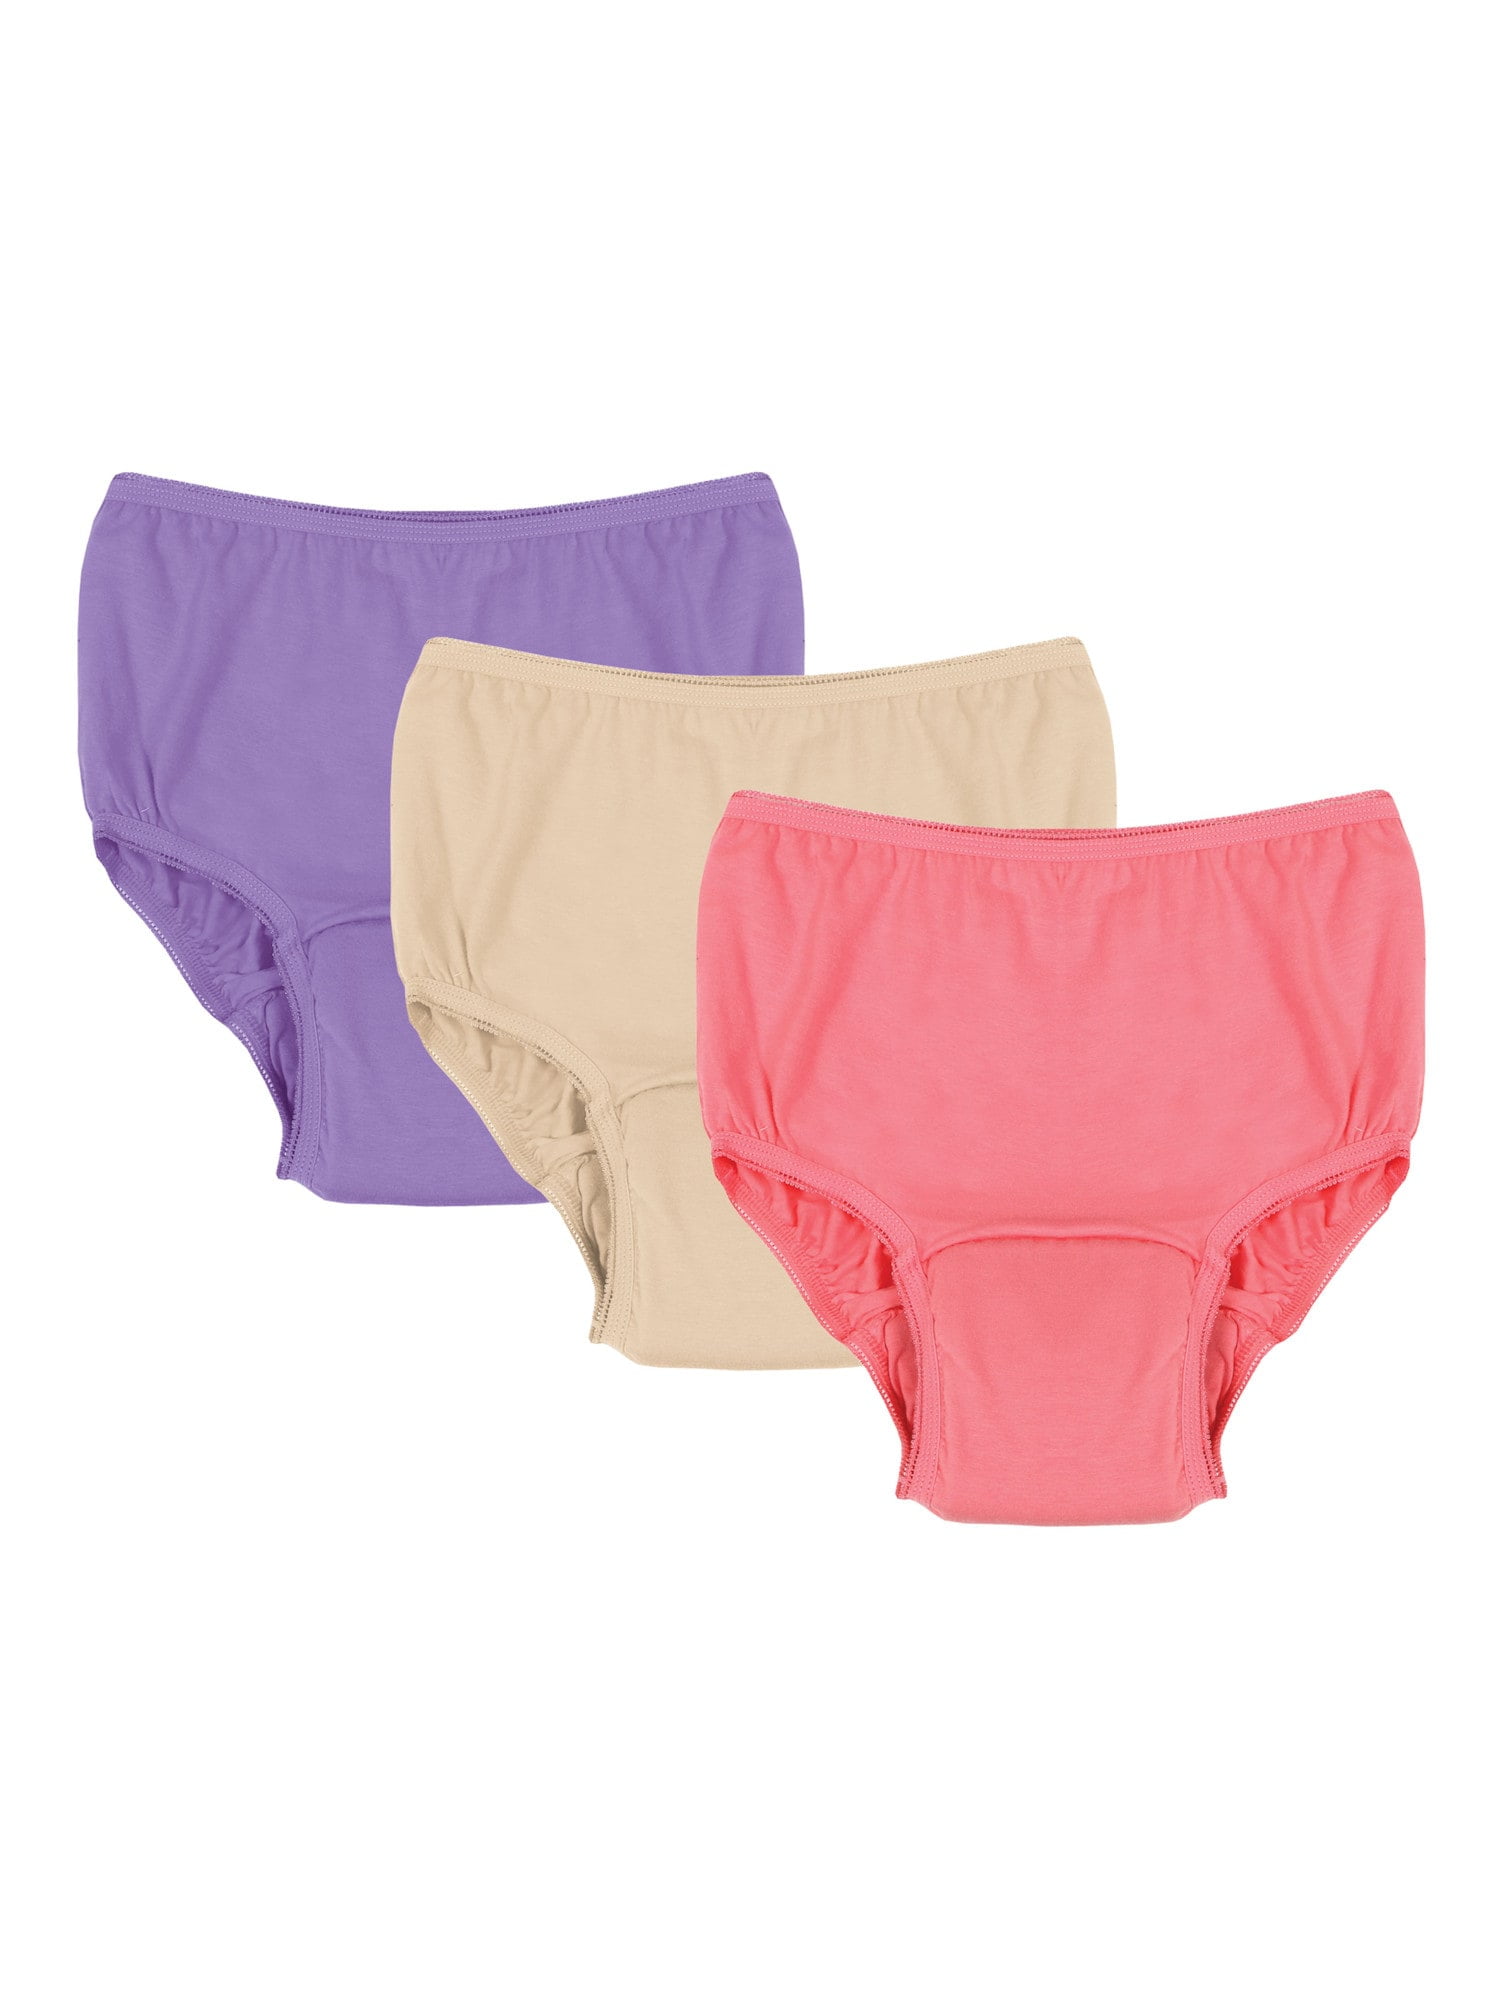 Adult Pull-up Heavy Incontinence Underwear 1000ml | Caring Clothing